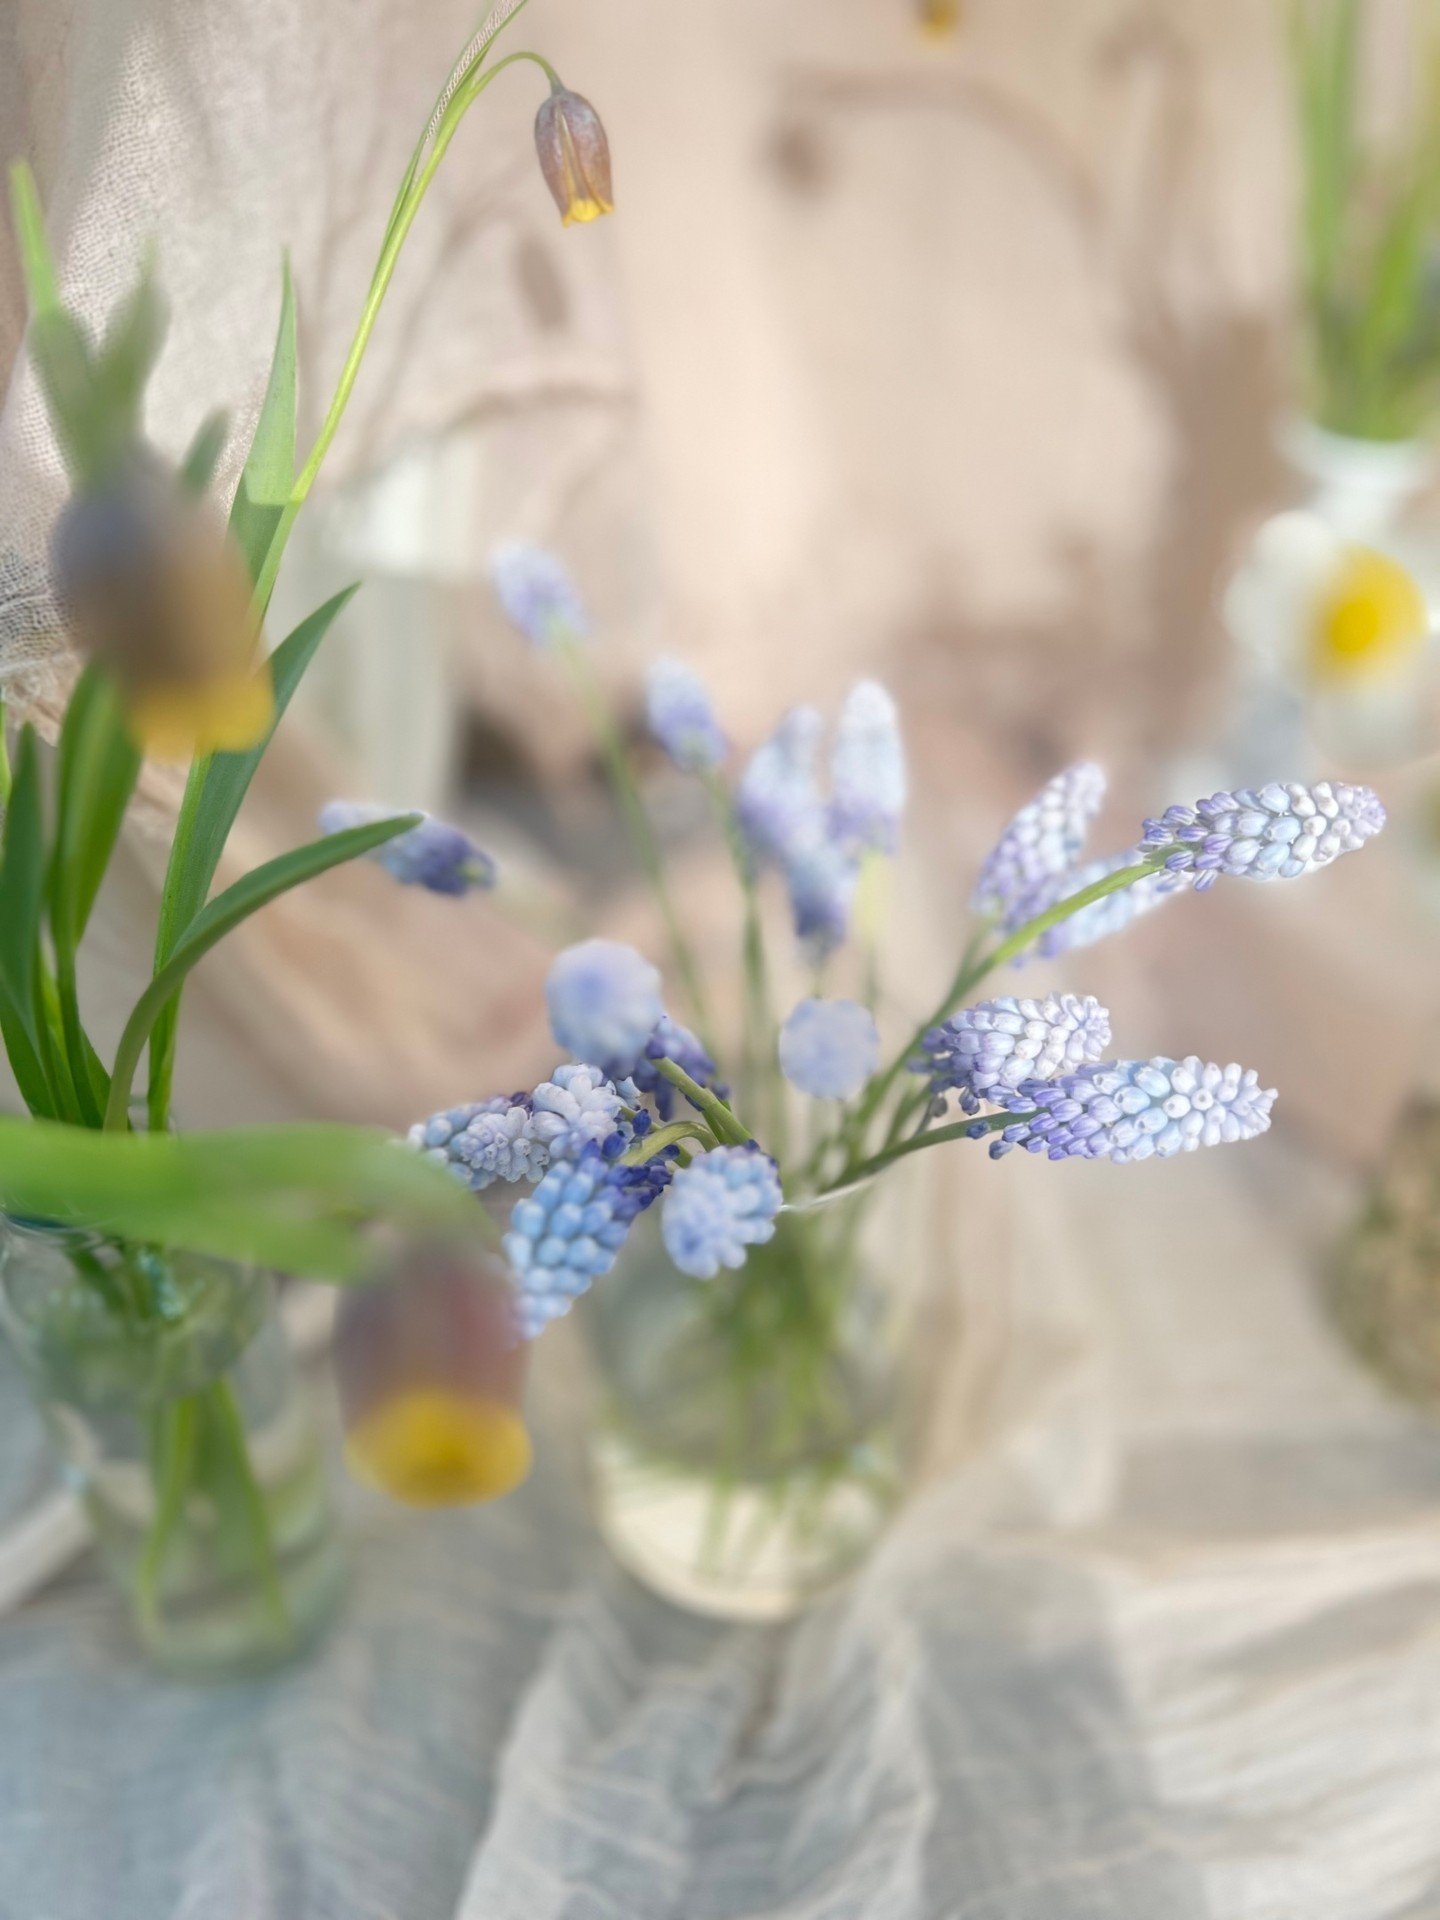 Spring ~ you might be my favorite ~ these blue muscari stopped me in my tracks. Each floret was singing &amp; calling my name. I know not yet of this flower&rsquo;s medicine but it may be one of my beloved blue spirit ones. 

Thank you Sam @seachange